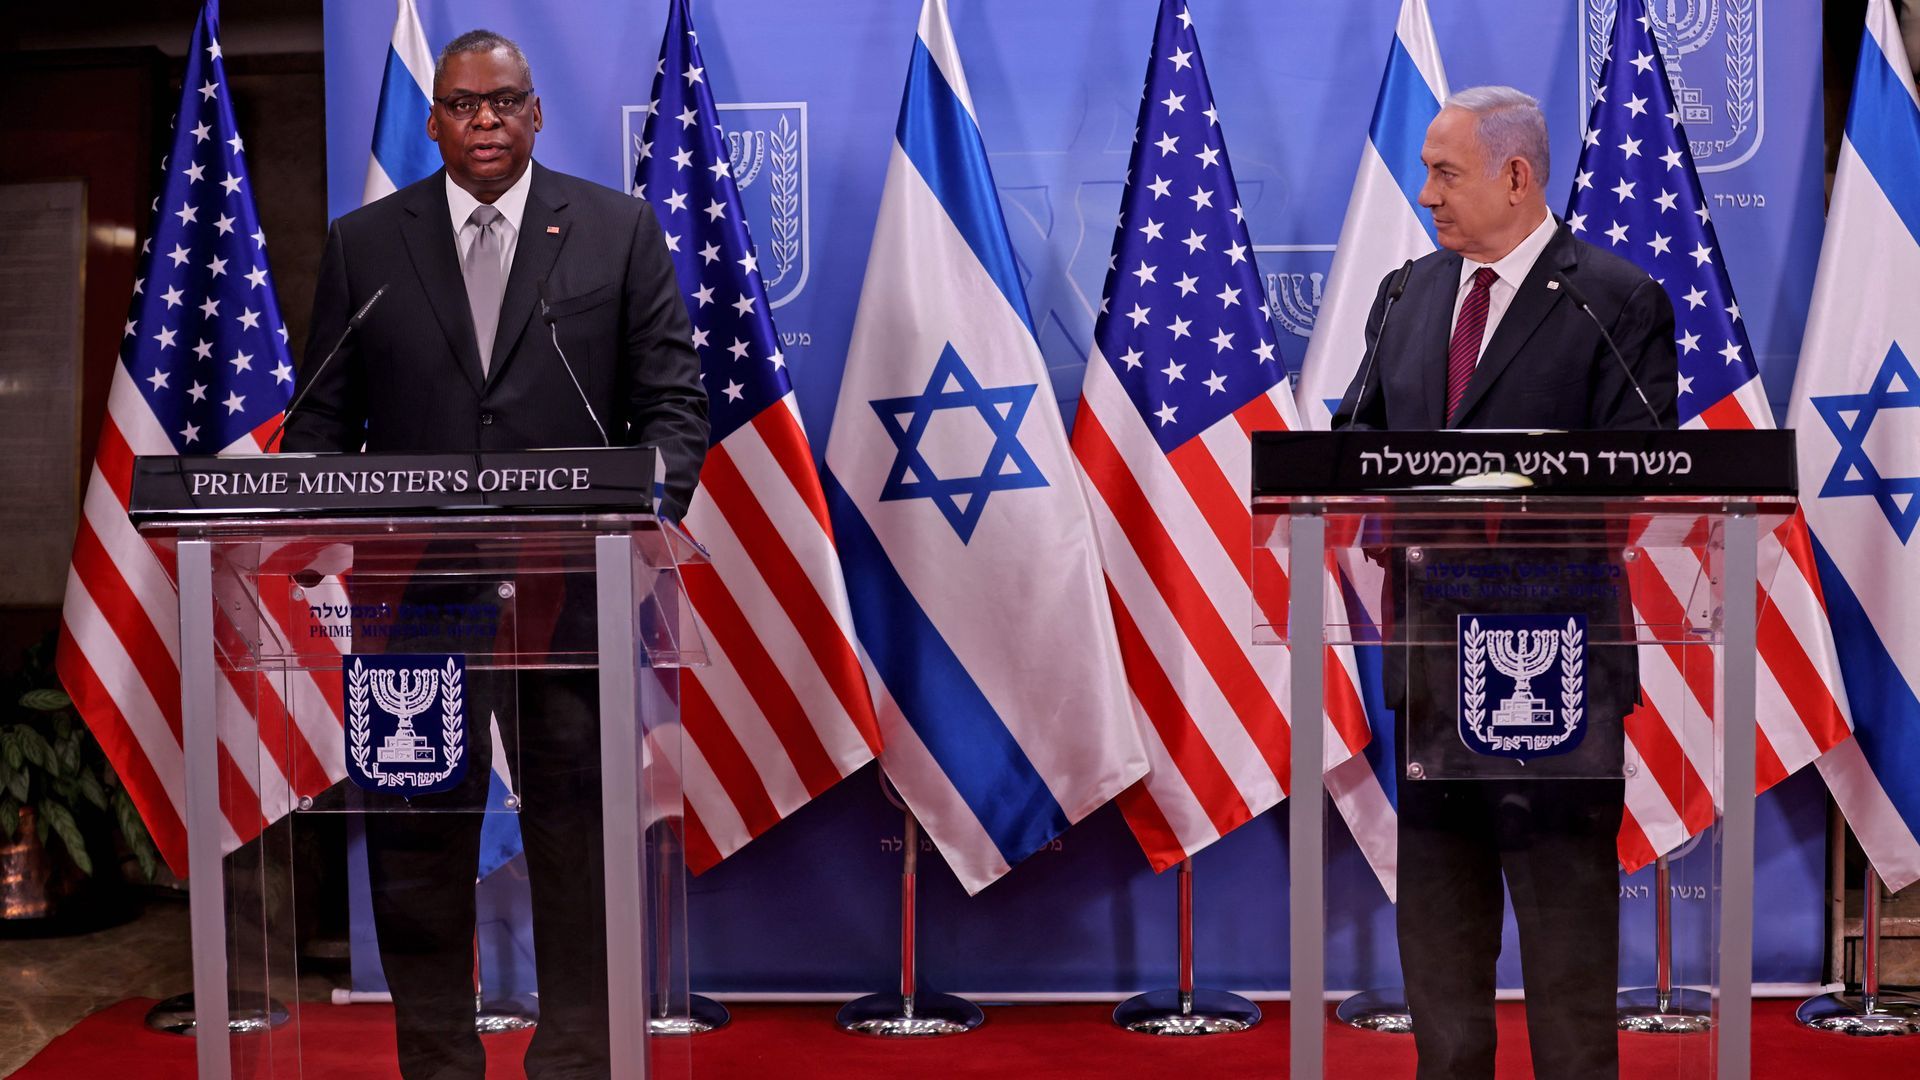 U.S. Defence Secretary Lloyd Austin and Israeli Prime Minister Benjamin Netanyahu give a statement after their meeting in Jerusalem on April 12, 2021. Photo: